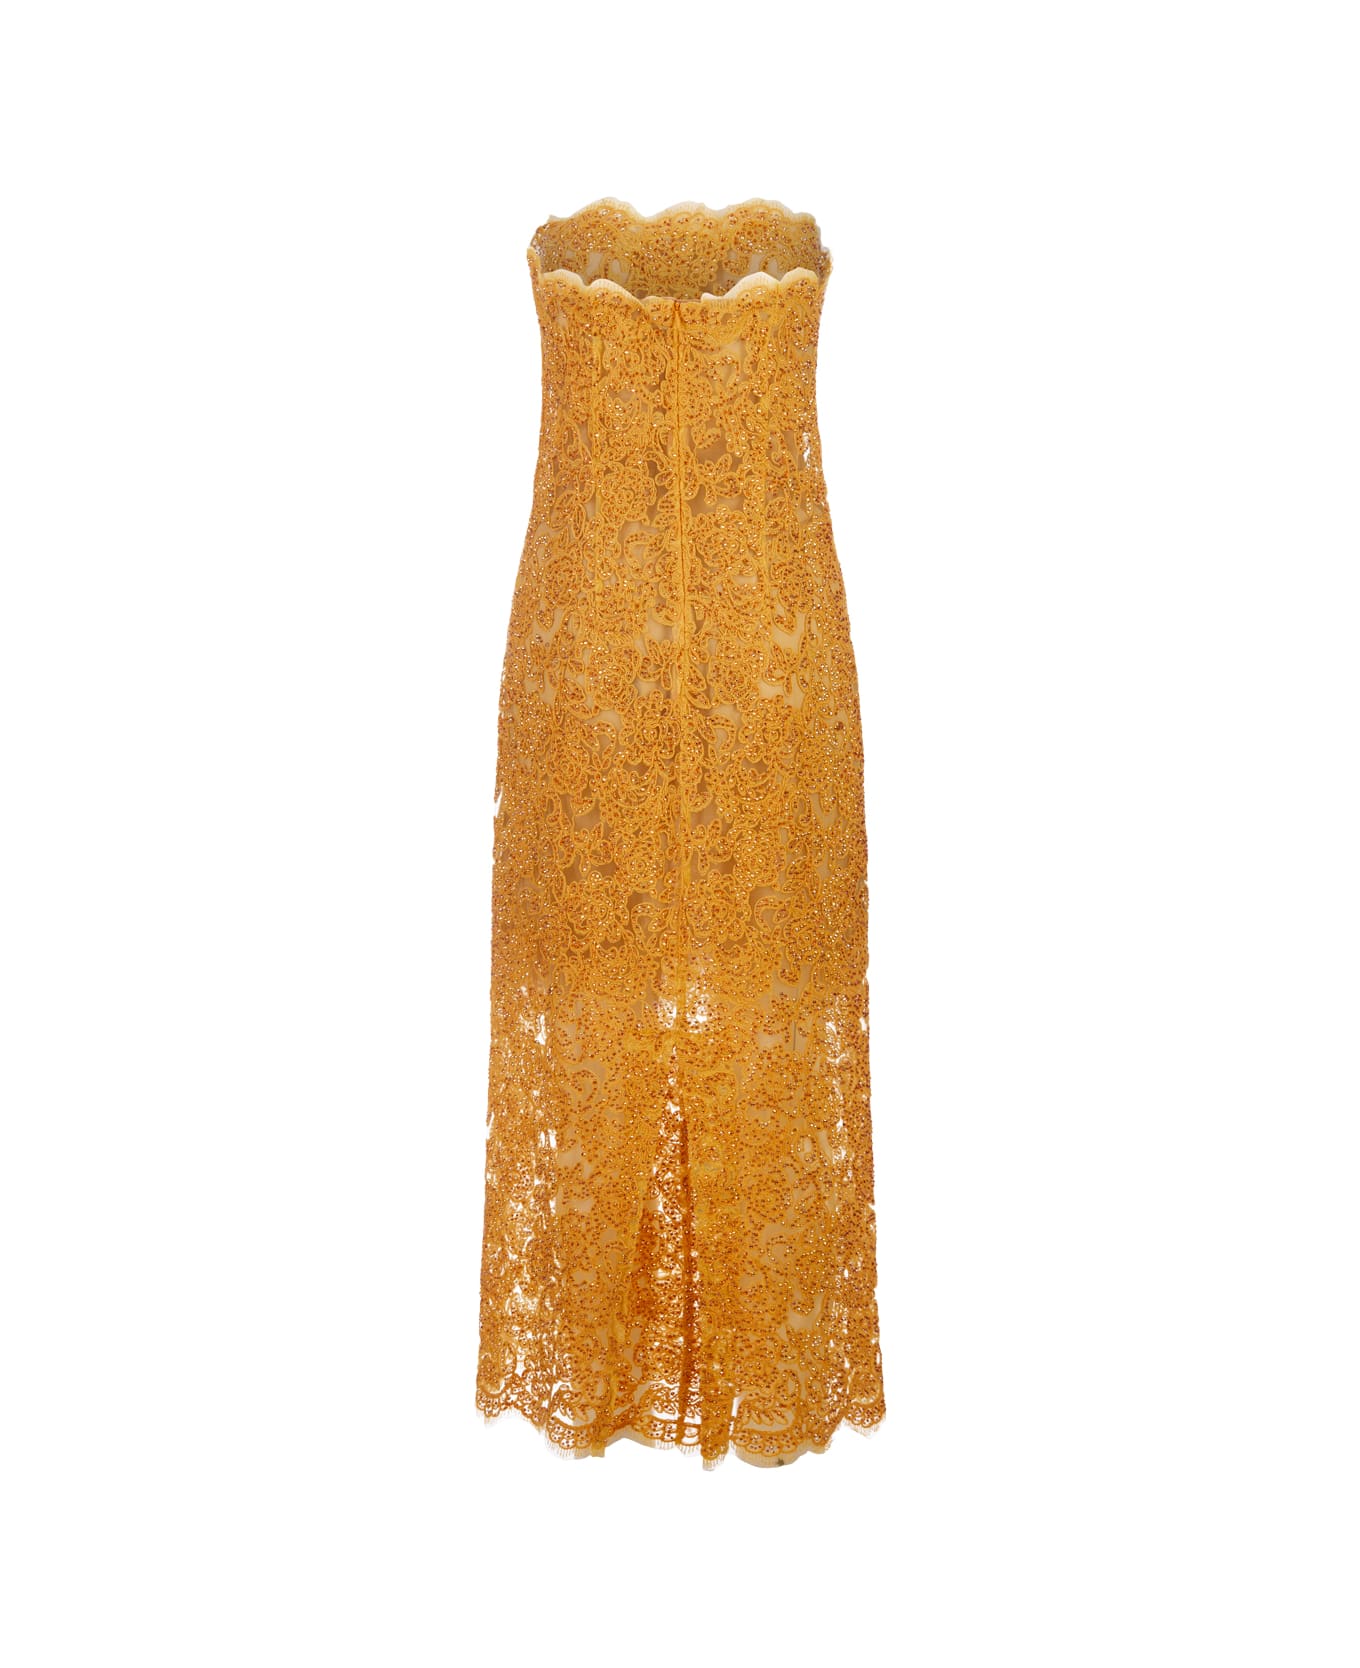 Ermanno Scervino Lace Longuette Dress With Micro Crystals - Yellow